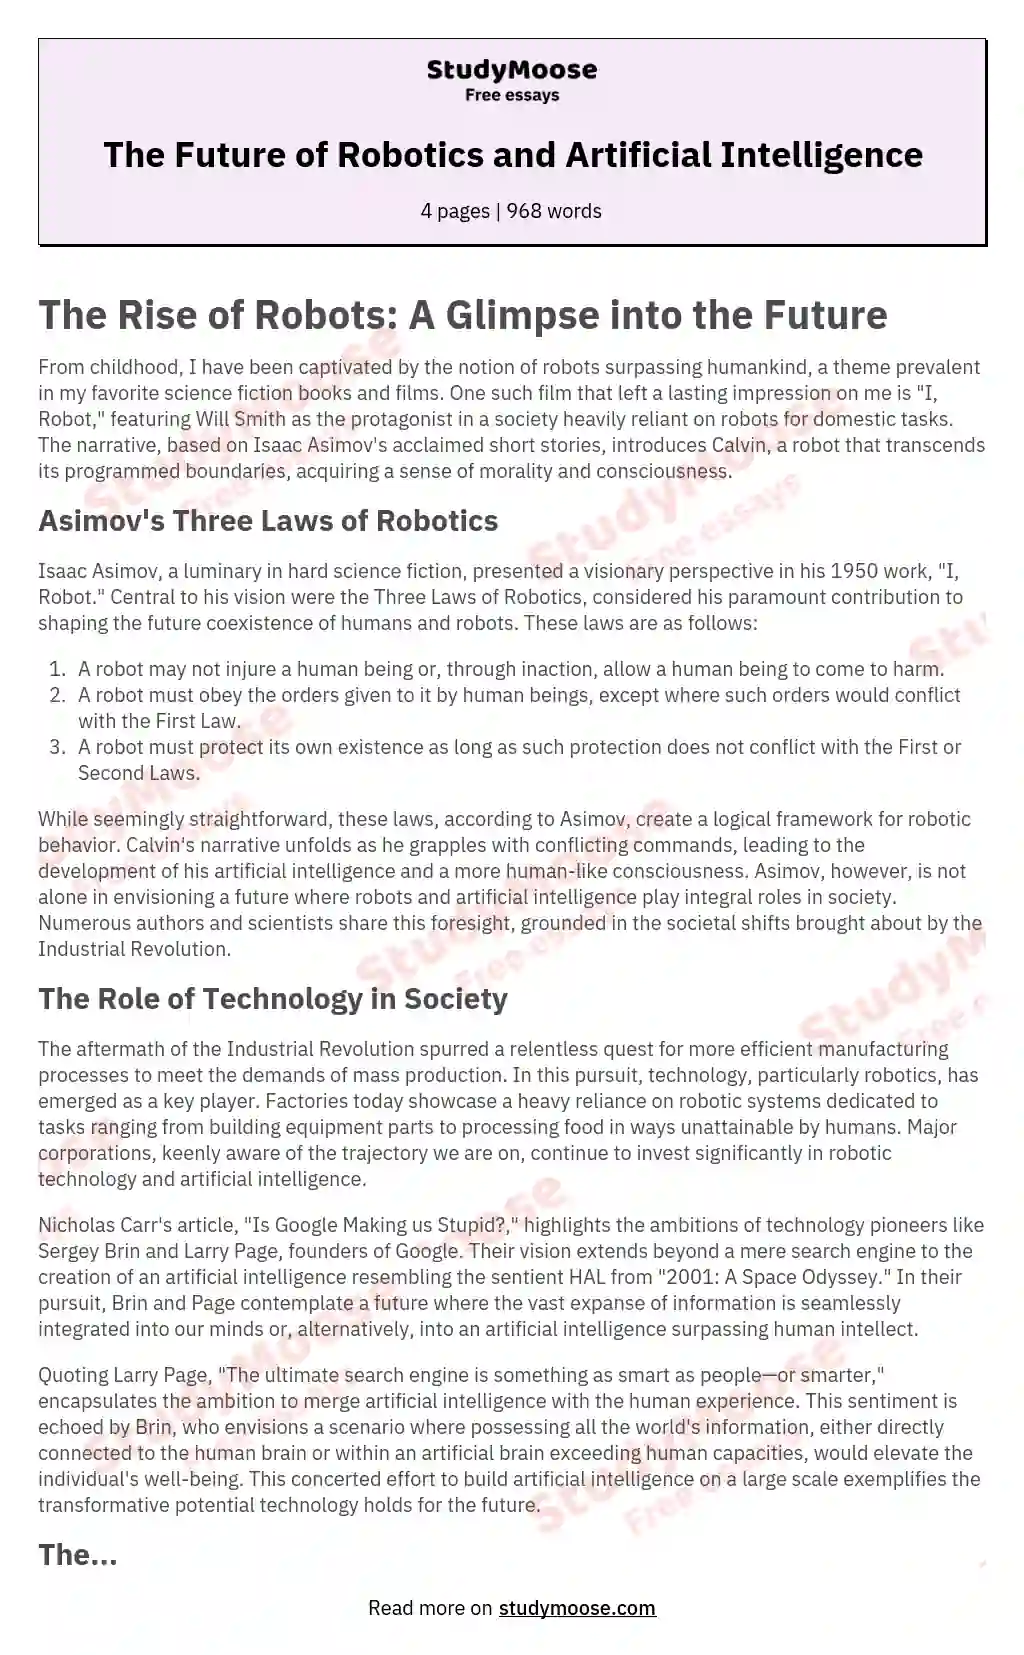 The Future of Robotics and Artificial Intelligence essay